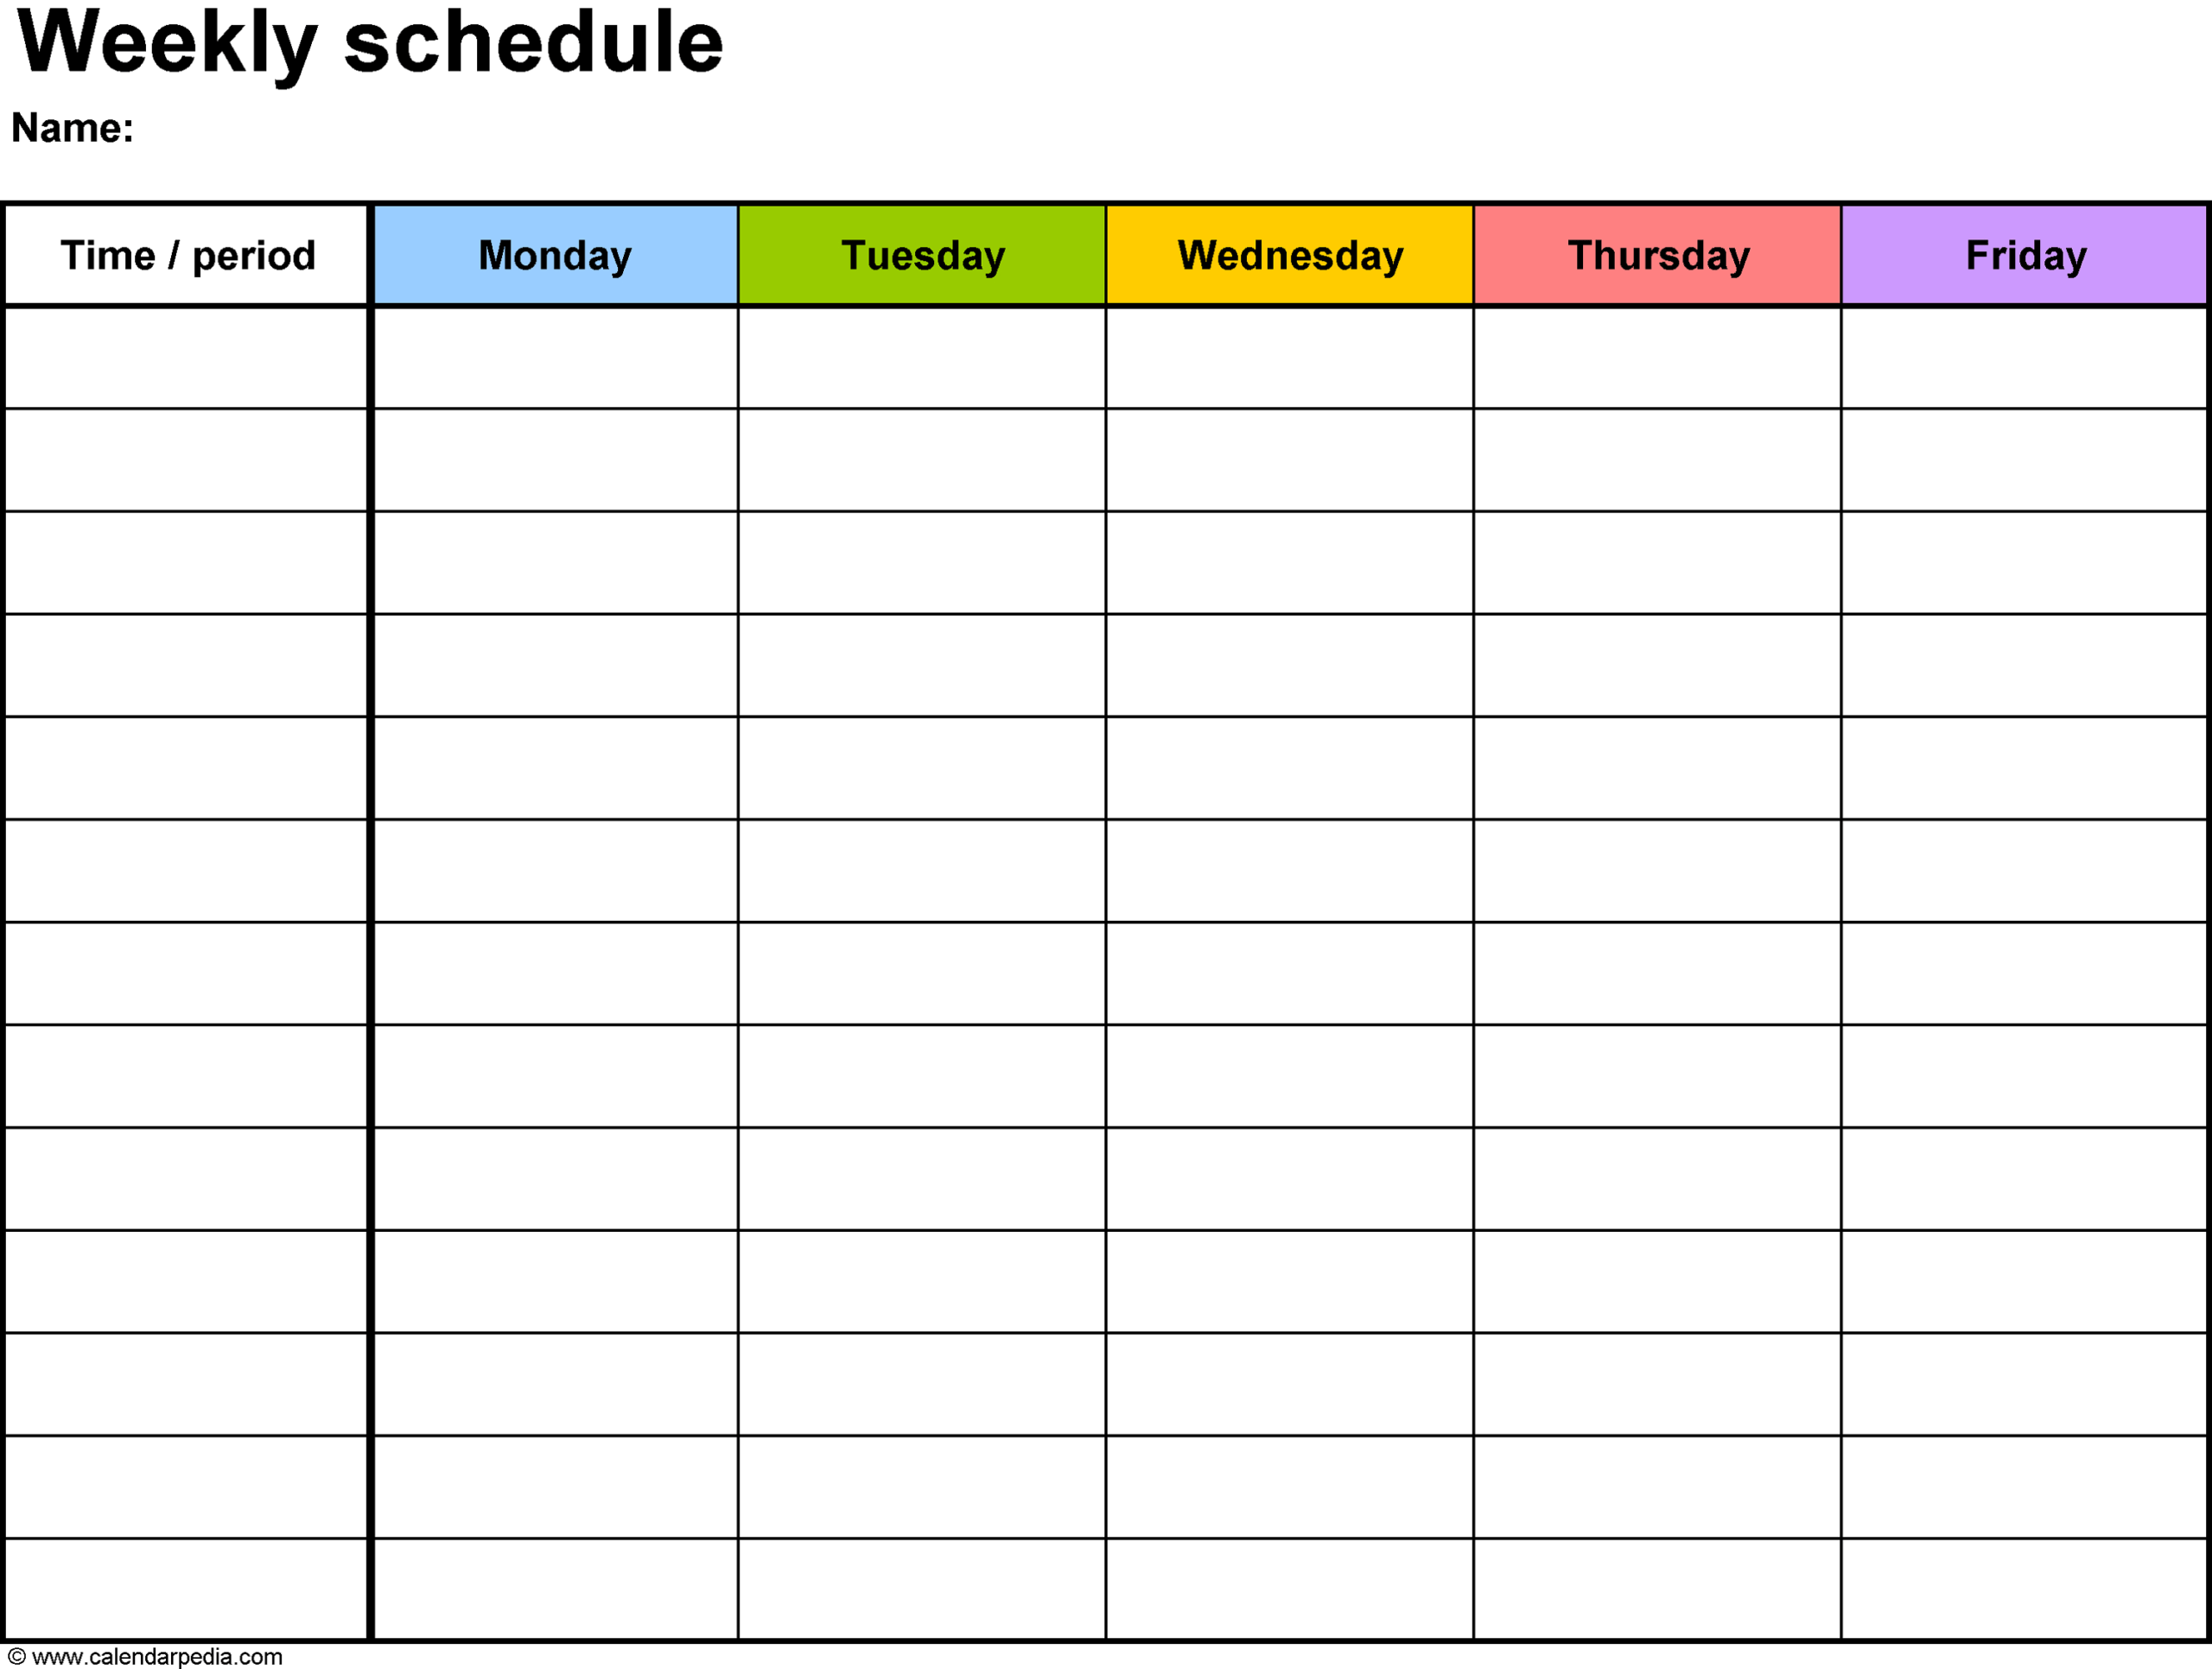 printable-workout-calendar-weekly-calendar-template-daily-within-blank-workout-schedule